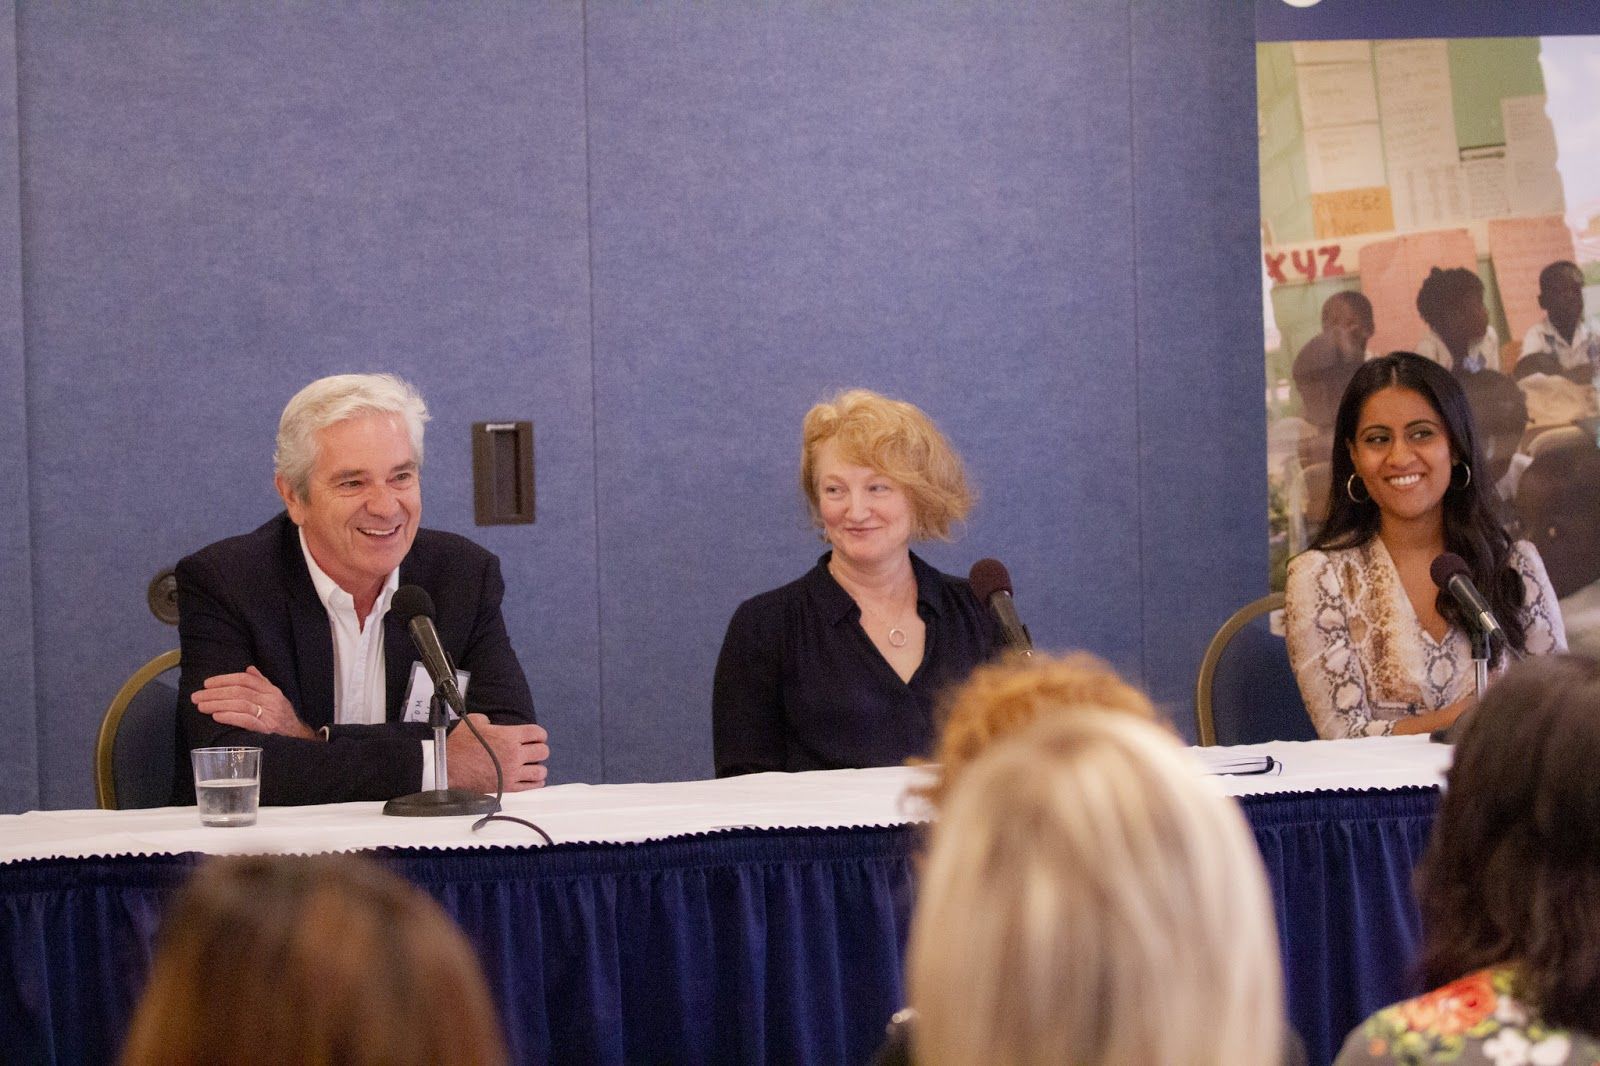 (From left to right) Tom Gjelten, Krista Tippett, and Krithika Varagur sharing a laugh during the workshops Q&A session. Image by Jin Ding. Washington, D.C., 2019. 